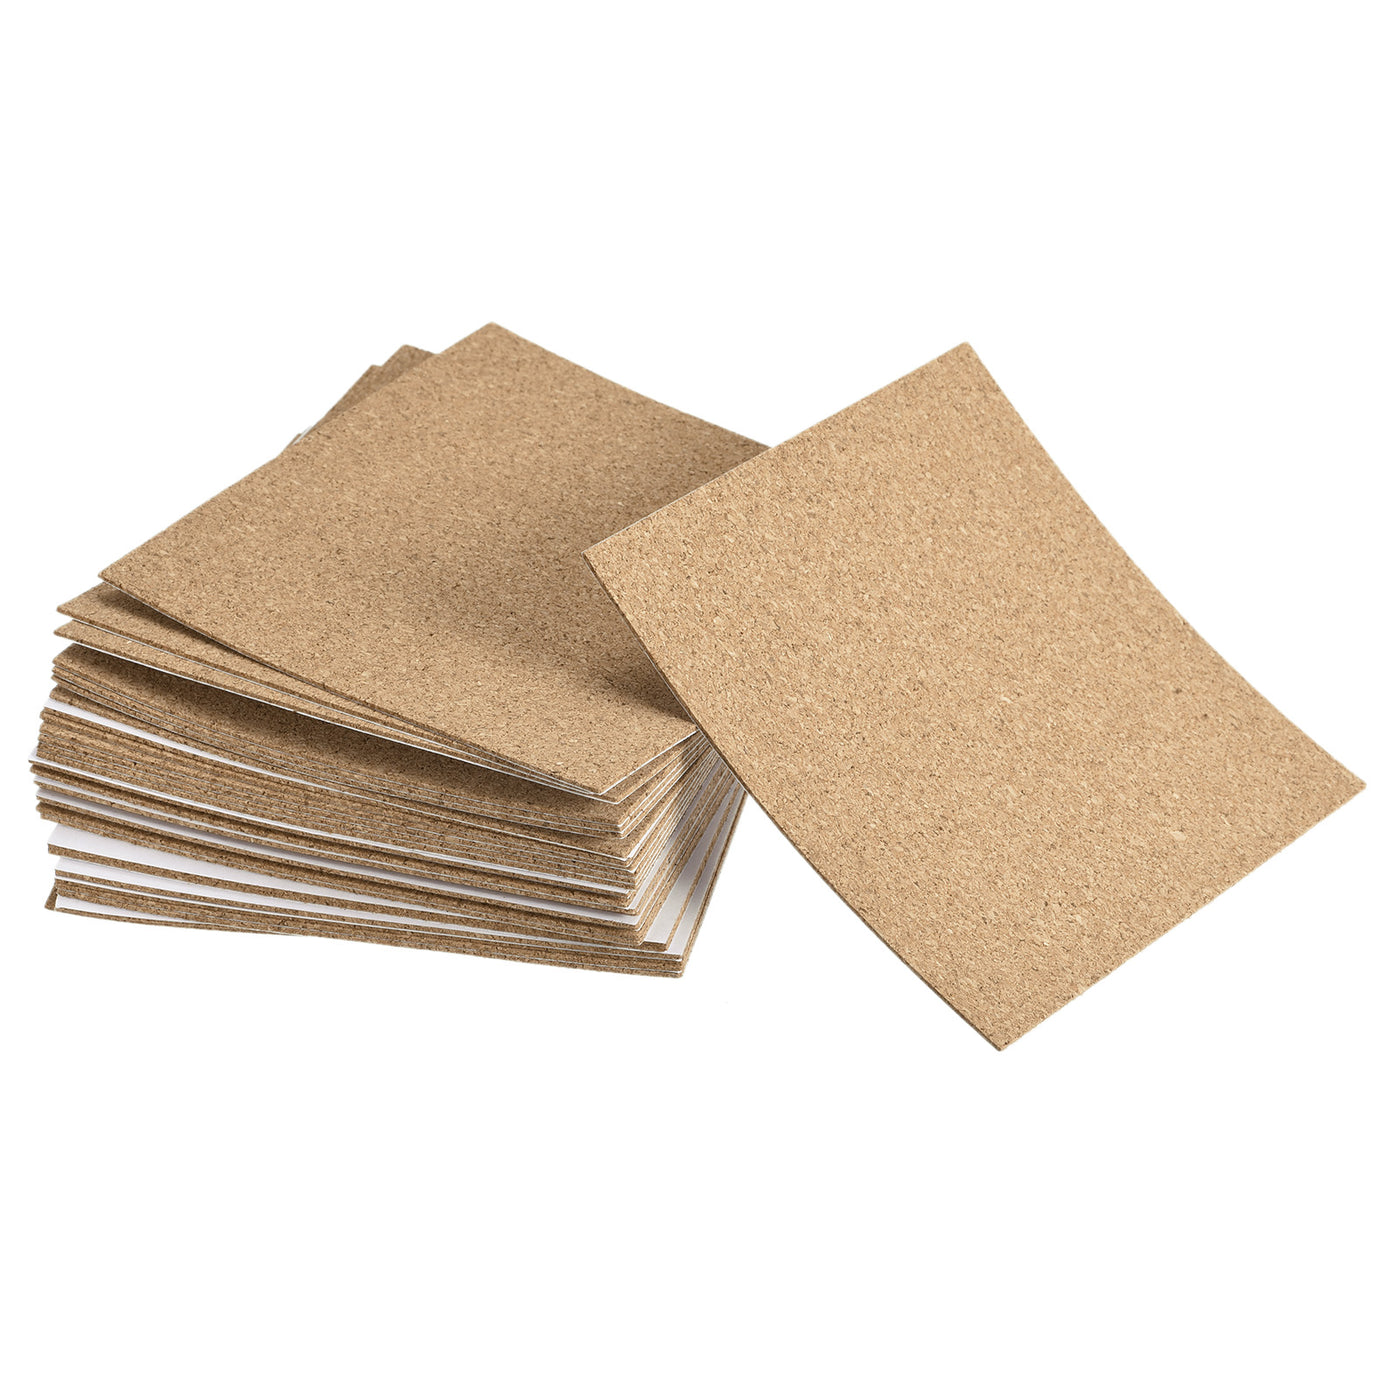 uxcell Uxcell 100x100x1mm Square Coasters Cork Cup Mat Pad Adhesive Backed 32pcs